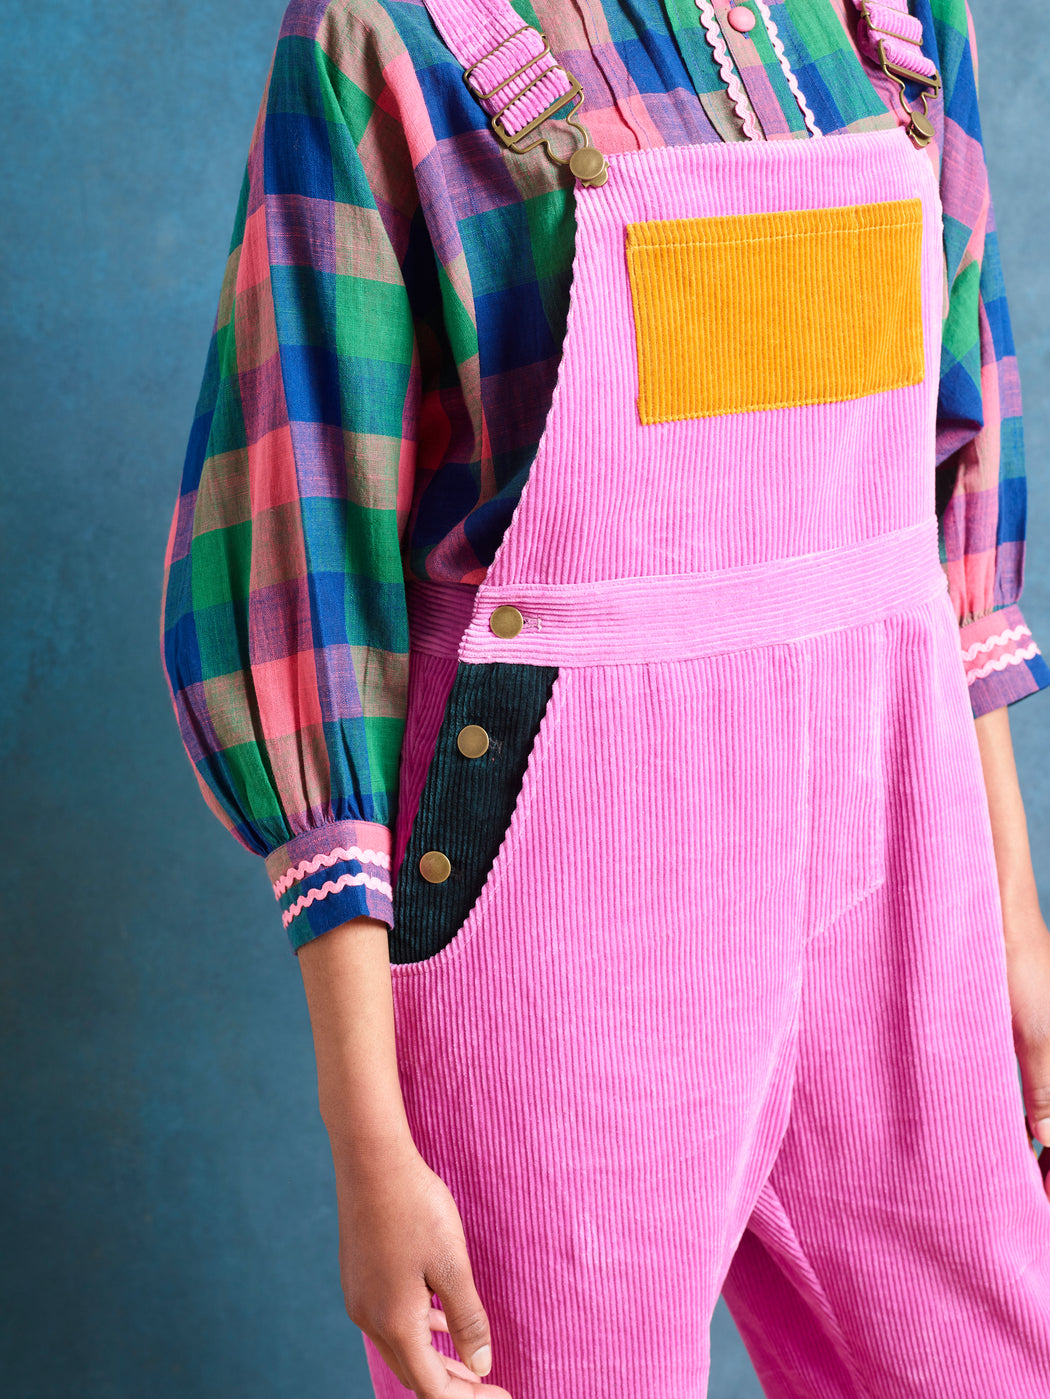 Lowie Pink Colourblock Dungarees